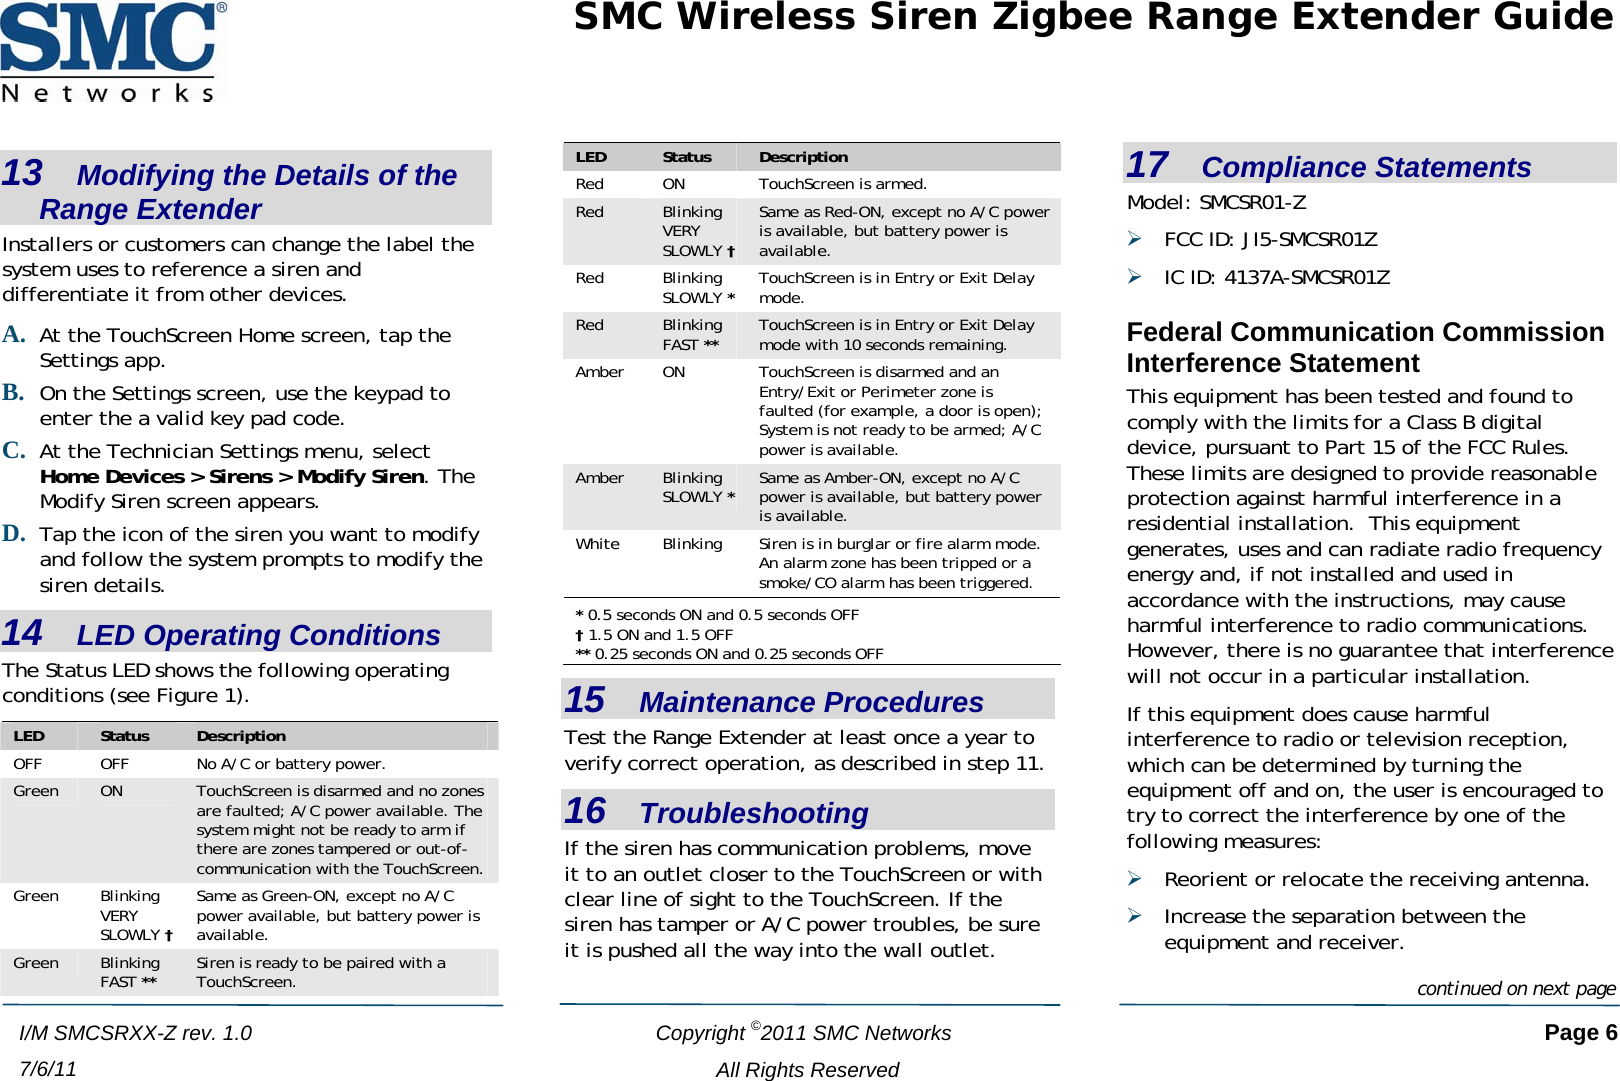 SMC Wireless Siren Zigbee Range Extender Guide   Copyright ©2011 SMC Networks   Page 6 All Rights Reserved I/M SMCSRXX-Z rev. 1.0 7/6/11 13   Modifying the Details of the Range Extender Installers or customers can change the label the system uses to reference a siren and differentiate it from other devices. A. At the TouchScreen Home screen, tap the Settings app. B. On the Settings screen, use the keypad to enter the a valid key pad code.  C. At the Technician Settings menu, select Home Devices &gt; Sirens &gt; Modify Siren. The Modify Siren screen appears. D. Tap the icon of the siren you want to modify and follow the system prompts to modify the siren details.  14   LED Operating Conditions The Status LED shows the following operating conditions (see Figure 1). LED  Status  Description OFF  OFF  No A/C or battery power. Green  ON  TouchScreen is disarmed and no zones are faulted; A/C power available. The system might not be ready to arm if there are zones tampered or out-of-communication with the TouchScreen. Green Blinking VERY SLOWLY † Same as Green-ON, except no A/C power available, but battery power is available. Green  Blinking FAST ** Siren is ready to be paired with a TouchScreen. LED  Status  Description Red  ON  TouchScreen is armed. Red  Blinking VERY SLOWLY † Same as Red-ON, except no A/C power is available, but battery power is available. Red Blinking SLOWLY * TouchScreen is in Entry or Exit Delay mode. Red  Blinking FAST ** TouchScreen is in Entry or Exit Delay mode with 10 seconds remaining. Amber  ON  TouchScreen is disarmed and an Entry/Exit or Perimeter zone is faulted (for example, a door is open); System is not ready to be armed; A/C power is available. Amber  Blinking SLOWLY * Same as Amber-ON, except no A/C power is available, but battery power is available. White  Blinking  Siren is in burglar or fire alarm mode.  An alarm zone has been tripped or a smoke/CO alarm has been triggered. * 0.5 seconds ON and 0.5 seconds OFF † 1.5 ON and 1.5 OFF ** 0.25 seconds ON and 0.25 seconds OFF 15   Maintenance Procedures Test the Range Extender at least once a year to verify correct operation, as described in step 11. 16   Troubleshooting If the siren has communication problems, move it to an outlet closer to the TouchScreen or with clear line of sight to the TouchScreen. If the siren has tamper or A/C power troubles, be sure it is pushed all the way into the wall outlet. 17   Compliance Statements Model: SMCSR01-Z ¾ FCC ID: JI5-SMCSR01Z ¾ IC ID: 4137A-SMCSR01Z Federal Communication Commission Interference Statement This equipment has been tested and found to comply with the limits for a Class B digital device, pursuant to Part 15 of the FCC Rules.  These limits are designed to provide reasonable protection against harmful interference in a residential installation.  This equipment generates, uses and can radiate radio frequency energy and, if not installed and used in accordance with the instructions, may cause harmful interference to radio communications.  However, there is no guarantee that interference will not occur in a particular installation.   If this equipment does cause harmful interference to radio or television reception, which can be determined by turning the equipment off and on, the user is encouraged to try to correct the interference by one of the following measures: ¾ Reorient or relocate the receiving antenna. ¾ Increase the separation between the equipment and receiver.continued on next page 